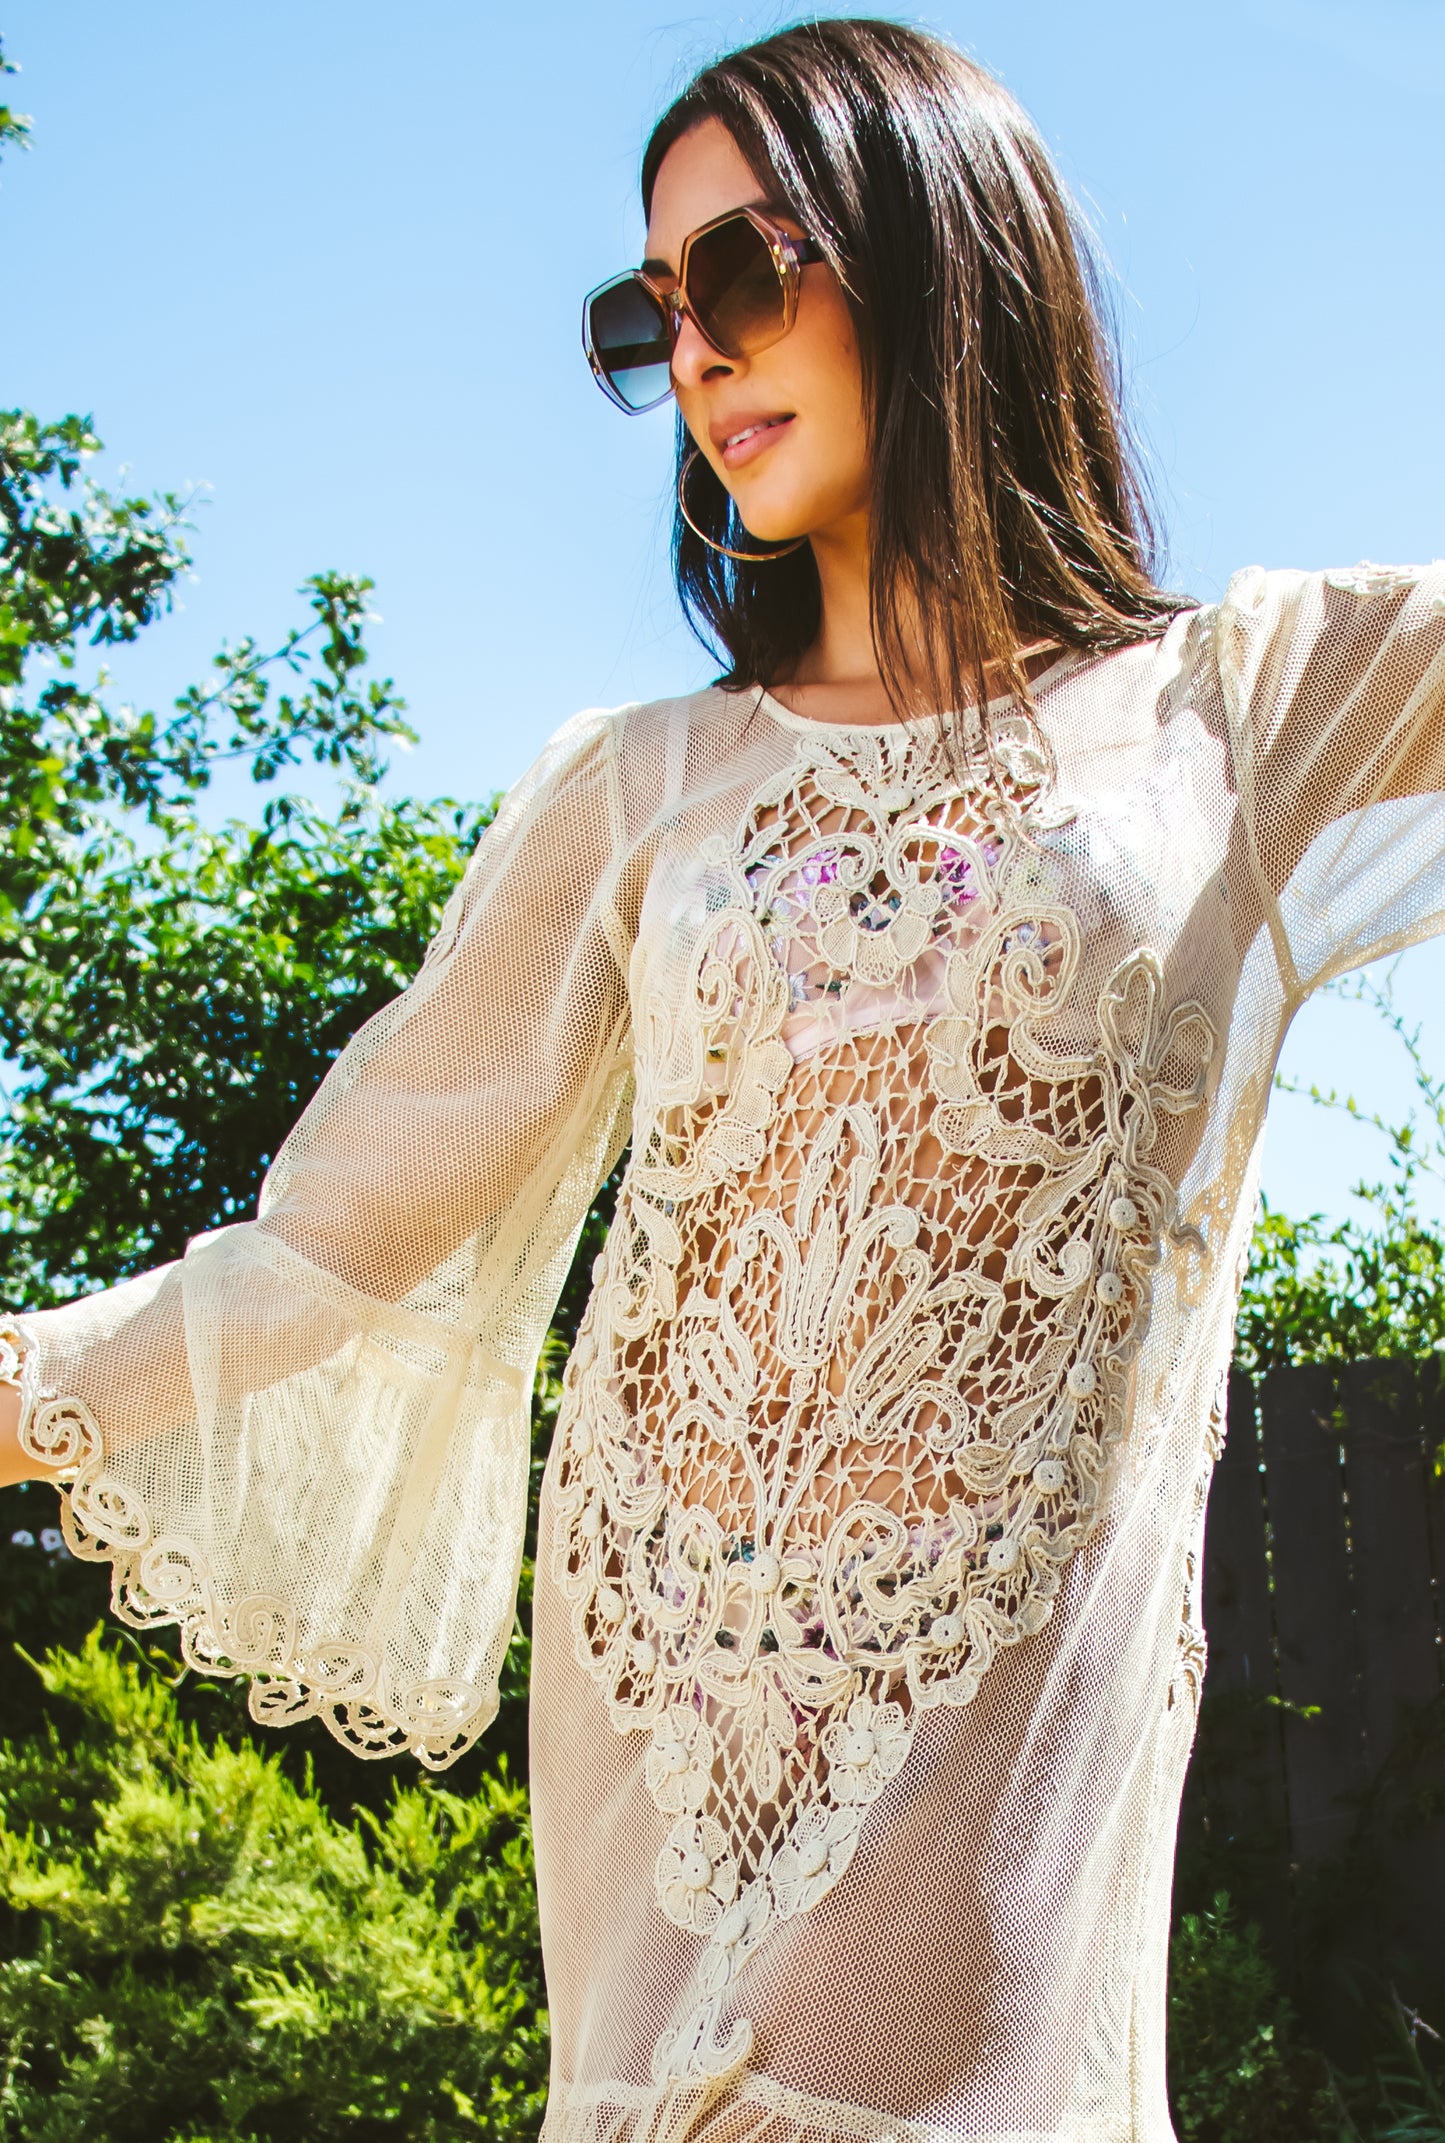 70's Mesh and a Lace Maxi Dress S/M